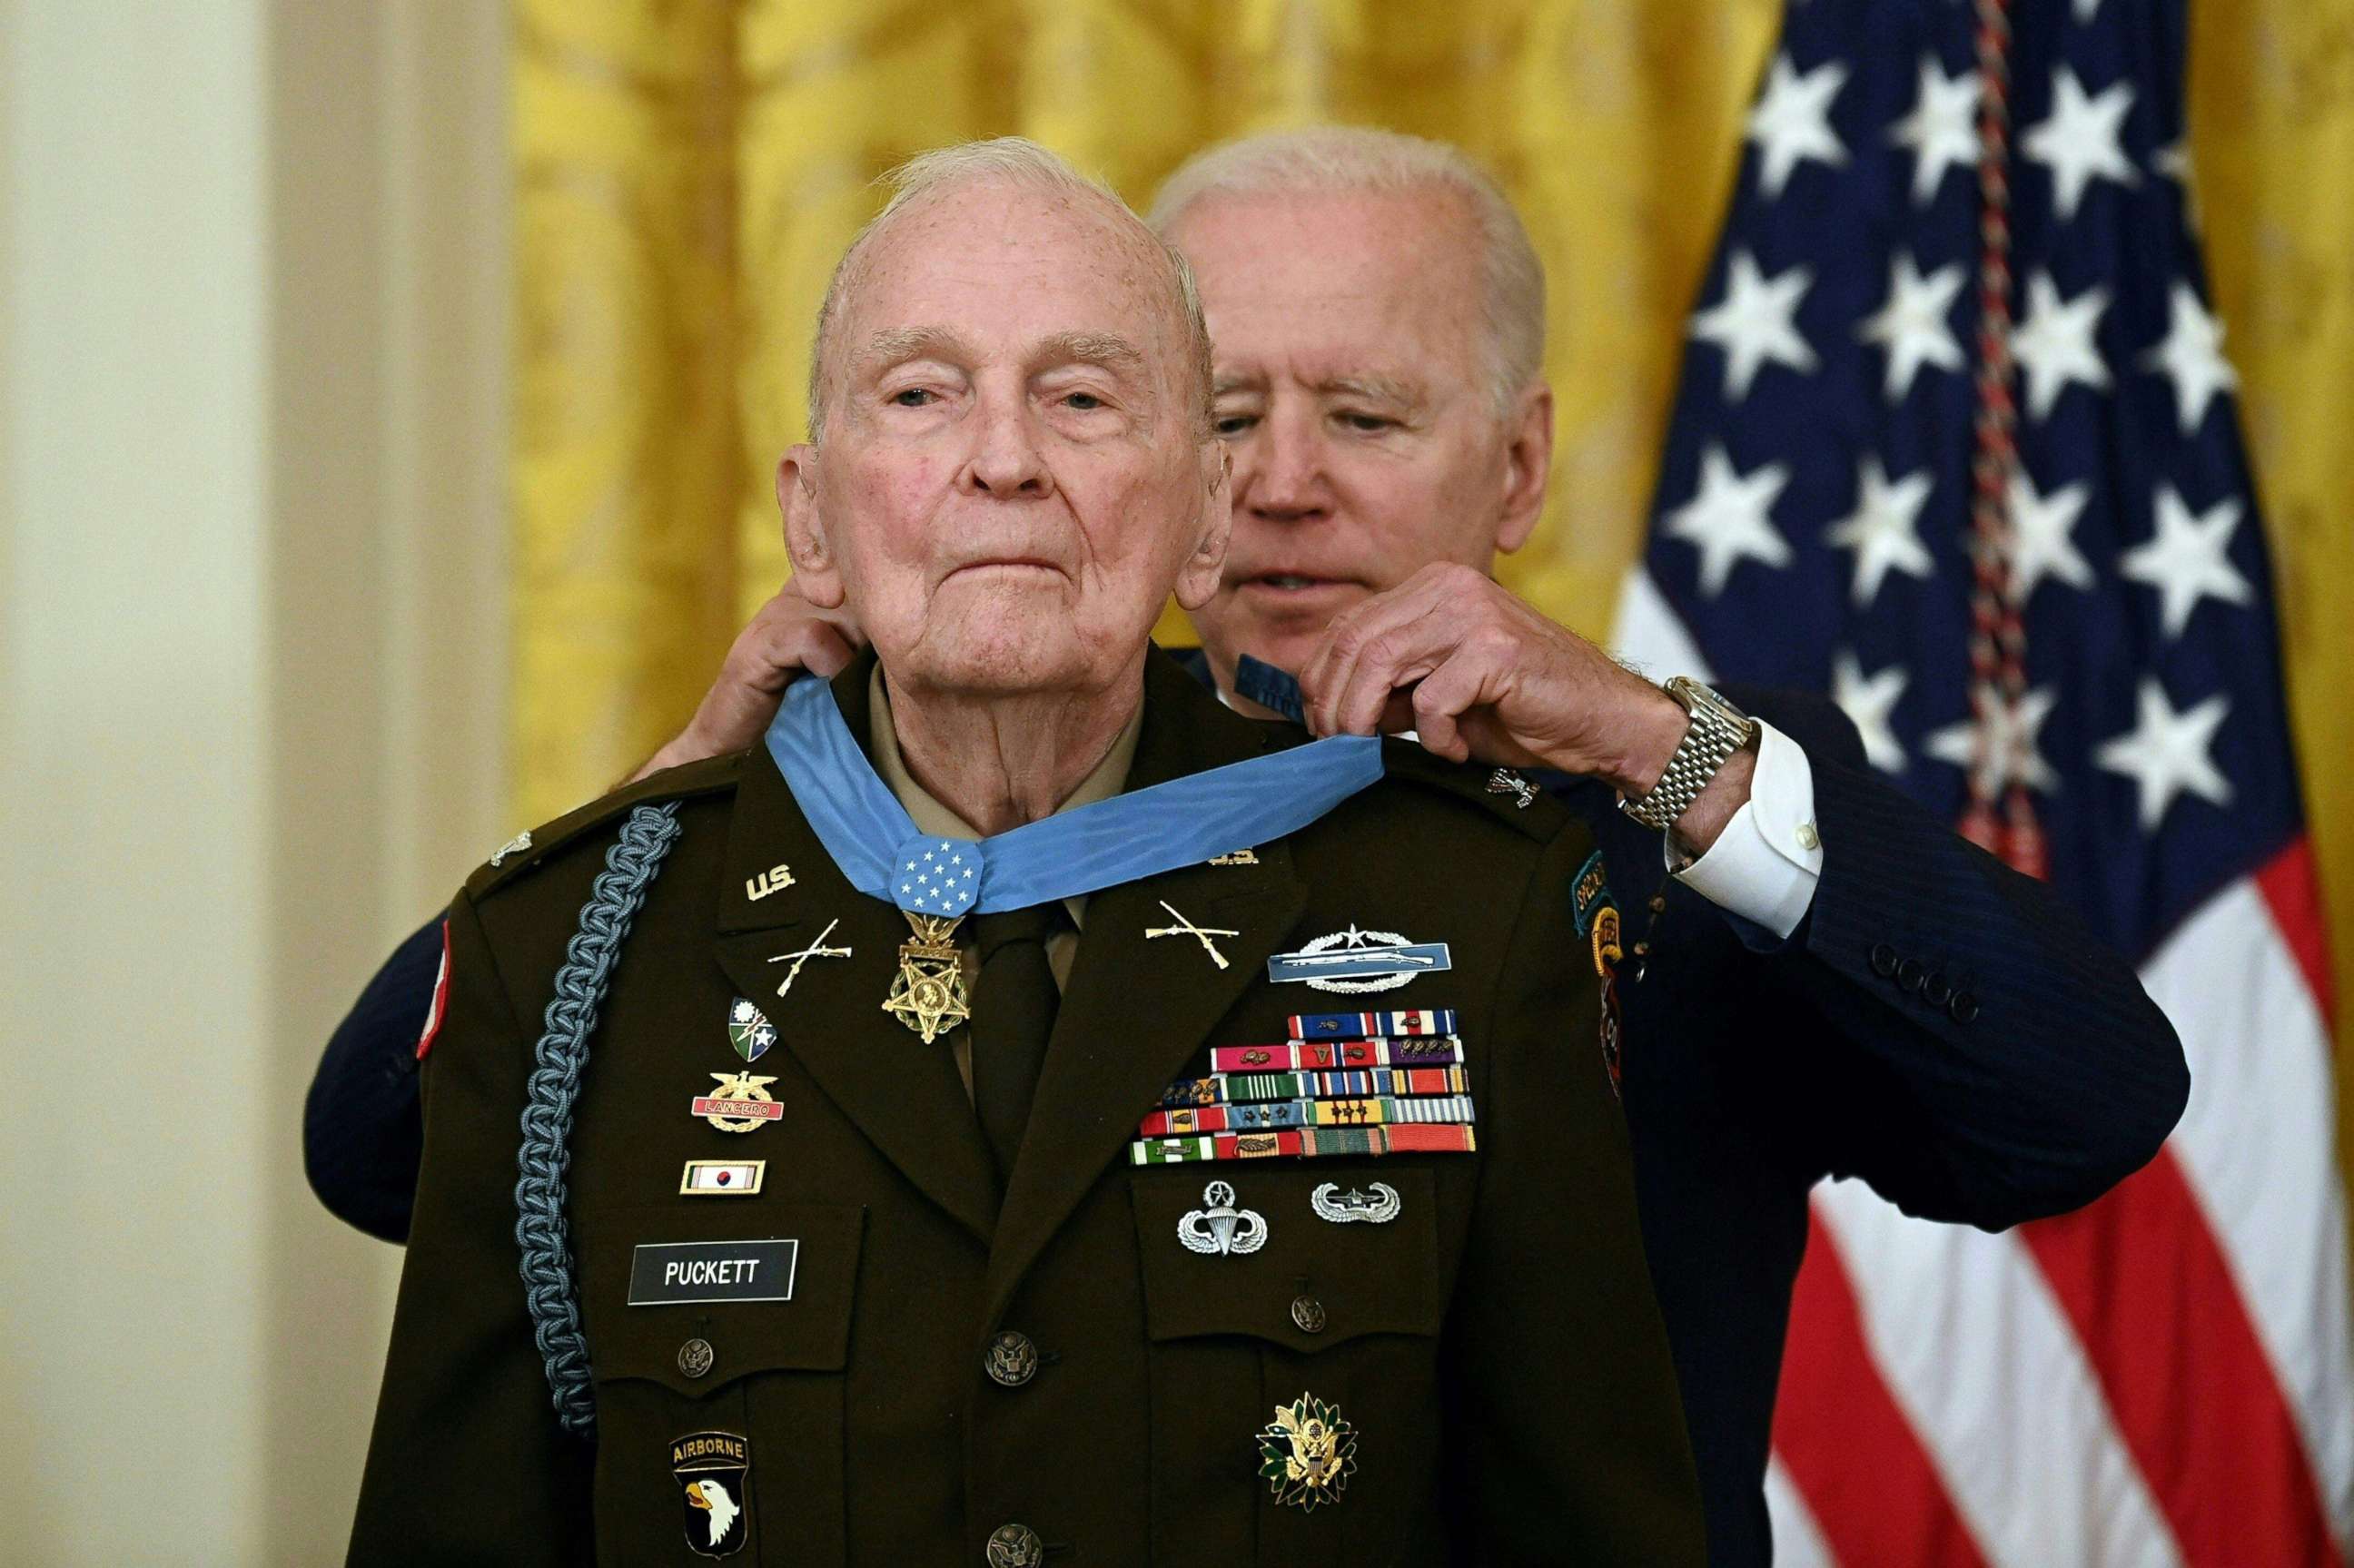 PHOTO: President Joe Biden presents the Medal of Honor to 94-year-old retired Army colonel Ralph Pukett Jr., for conspicuous gallantry while serving during the Korean War, in a ceremony in the East Room of the White House in Washington on May 21, 2021.